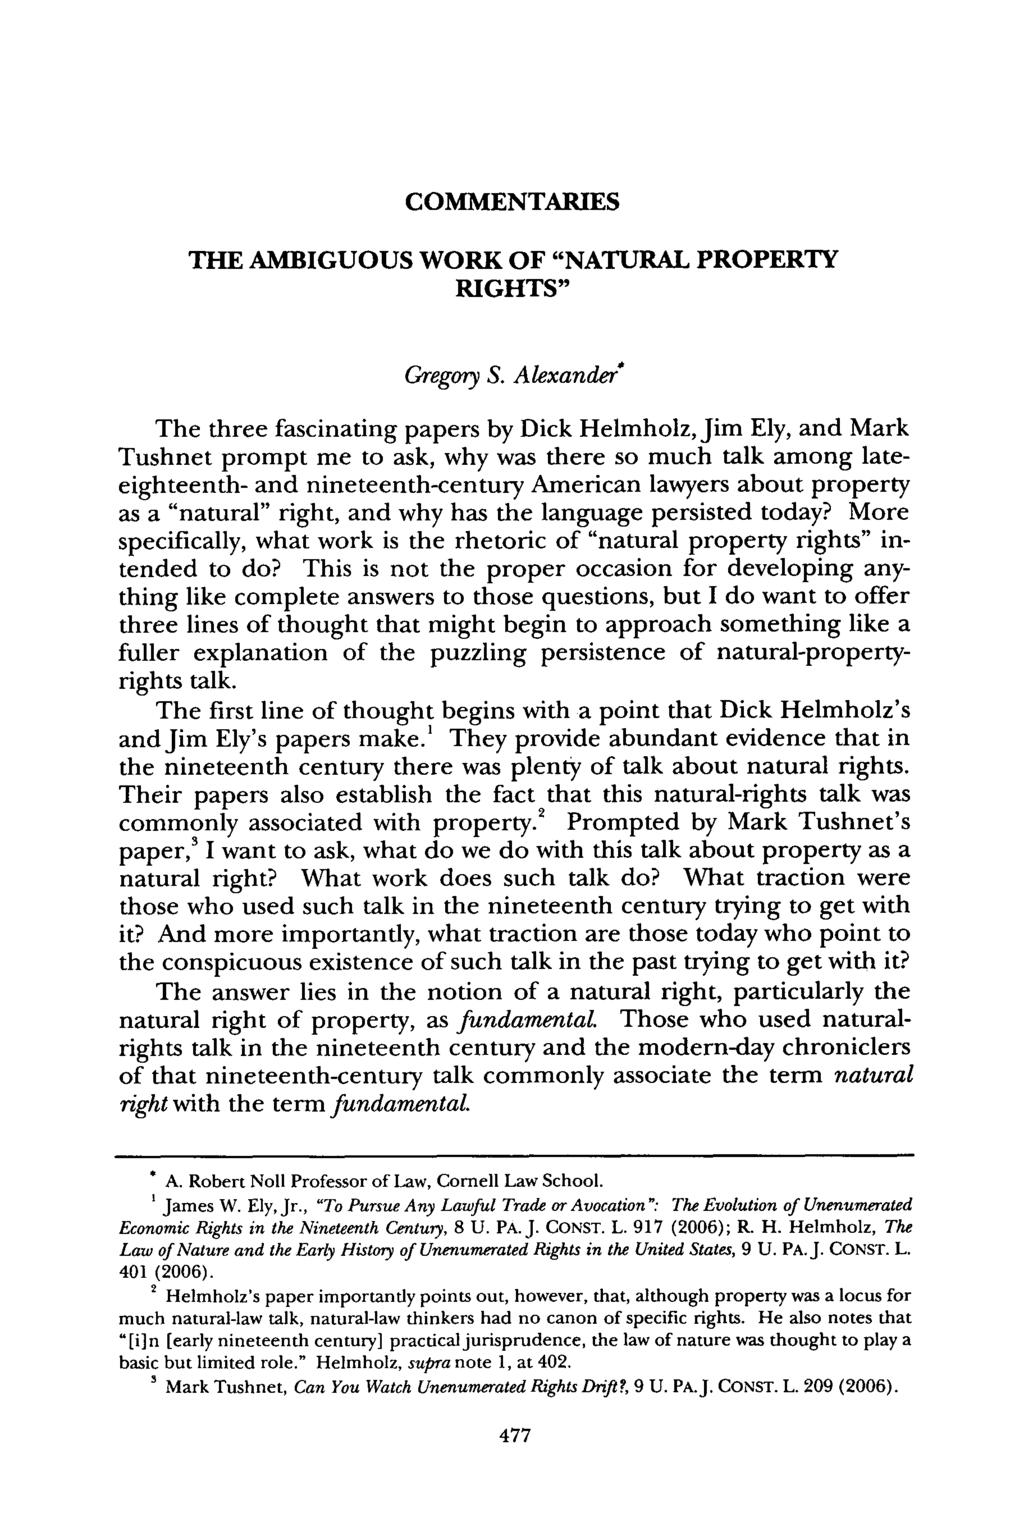 COMMENTARIES THE AMBIGUOUS WORK OF "NATURAL PROPERTY RIGHTS" Gregory S.